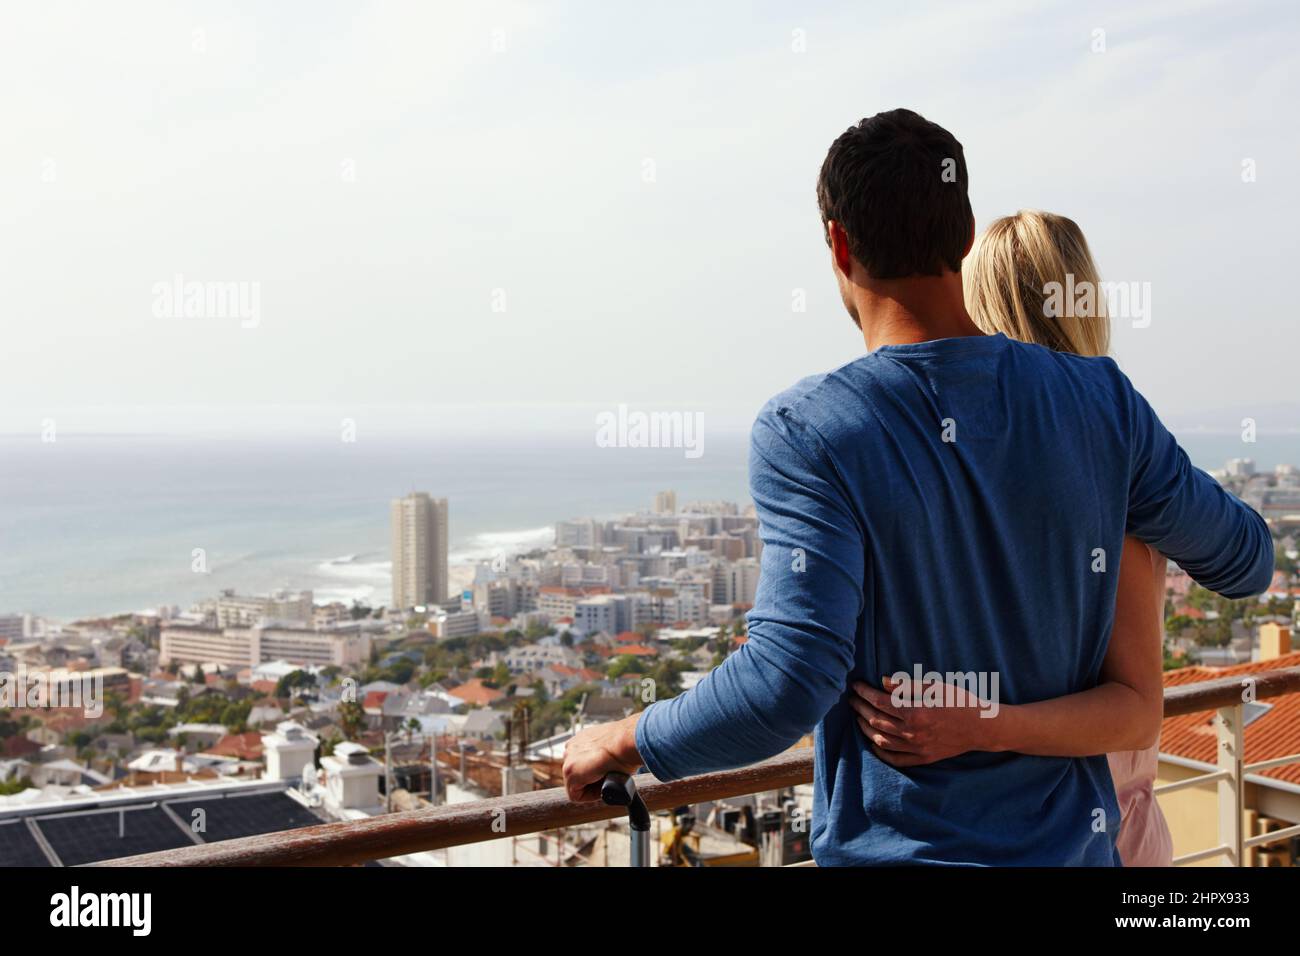 We love our new place. A happy couple standing on a balcony looking over the view. Stock Photo